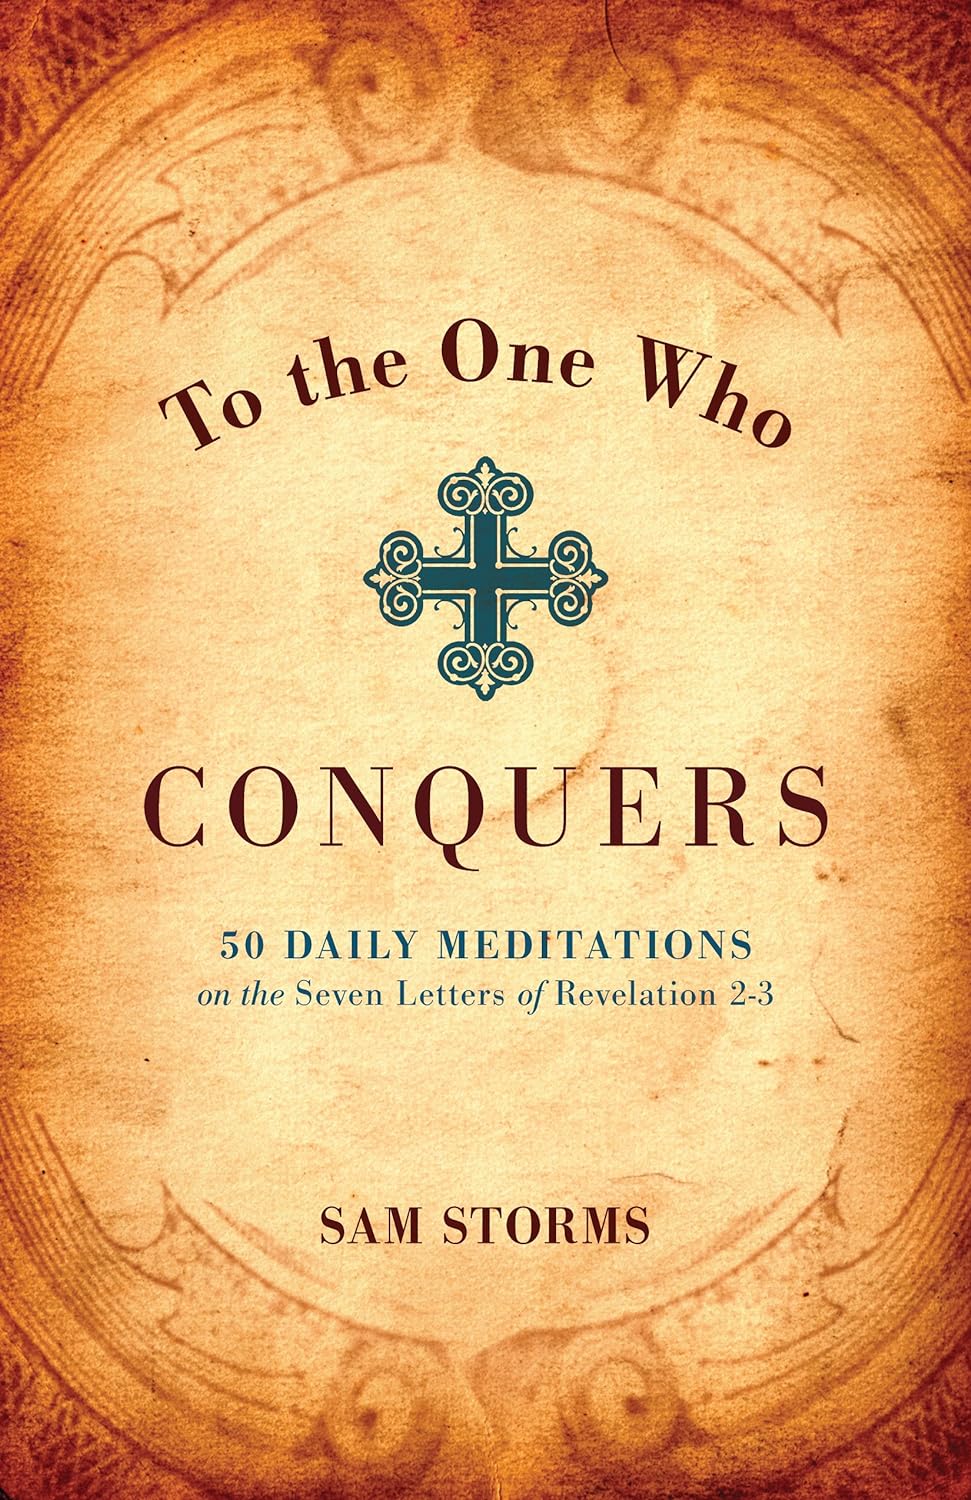 To the One Who Conquers- 50 Daily Meditations on the Seven Letters of Revelation 2-3